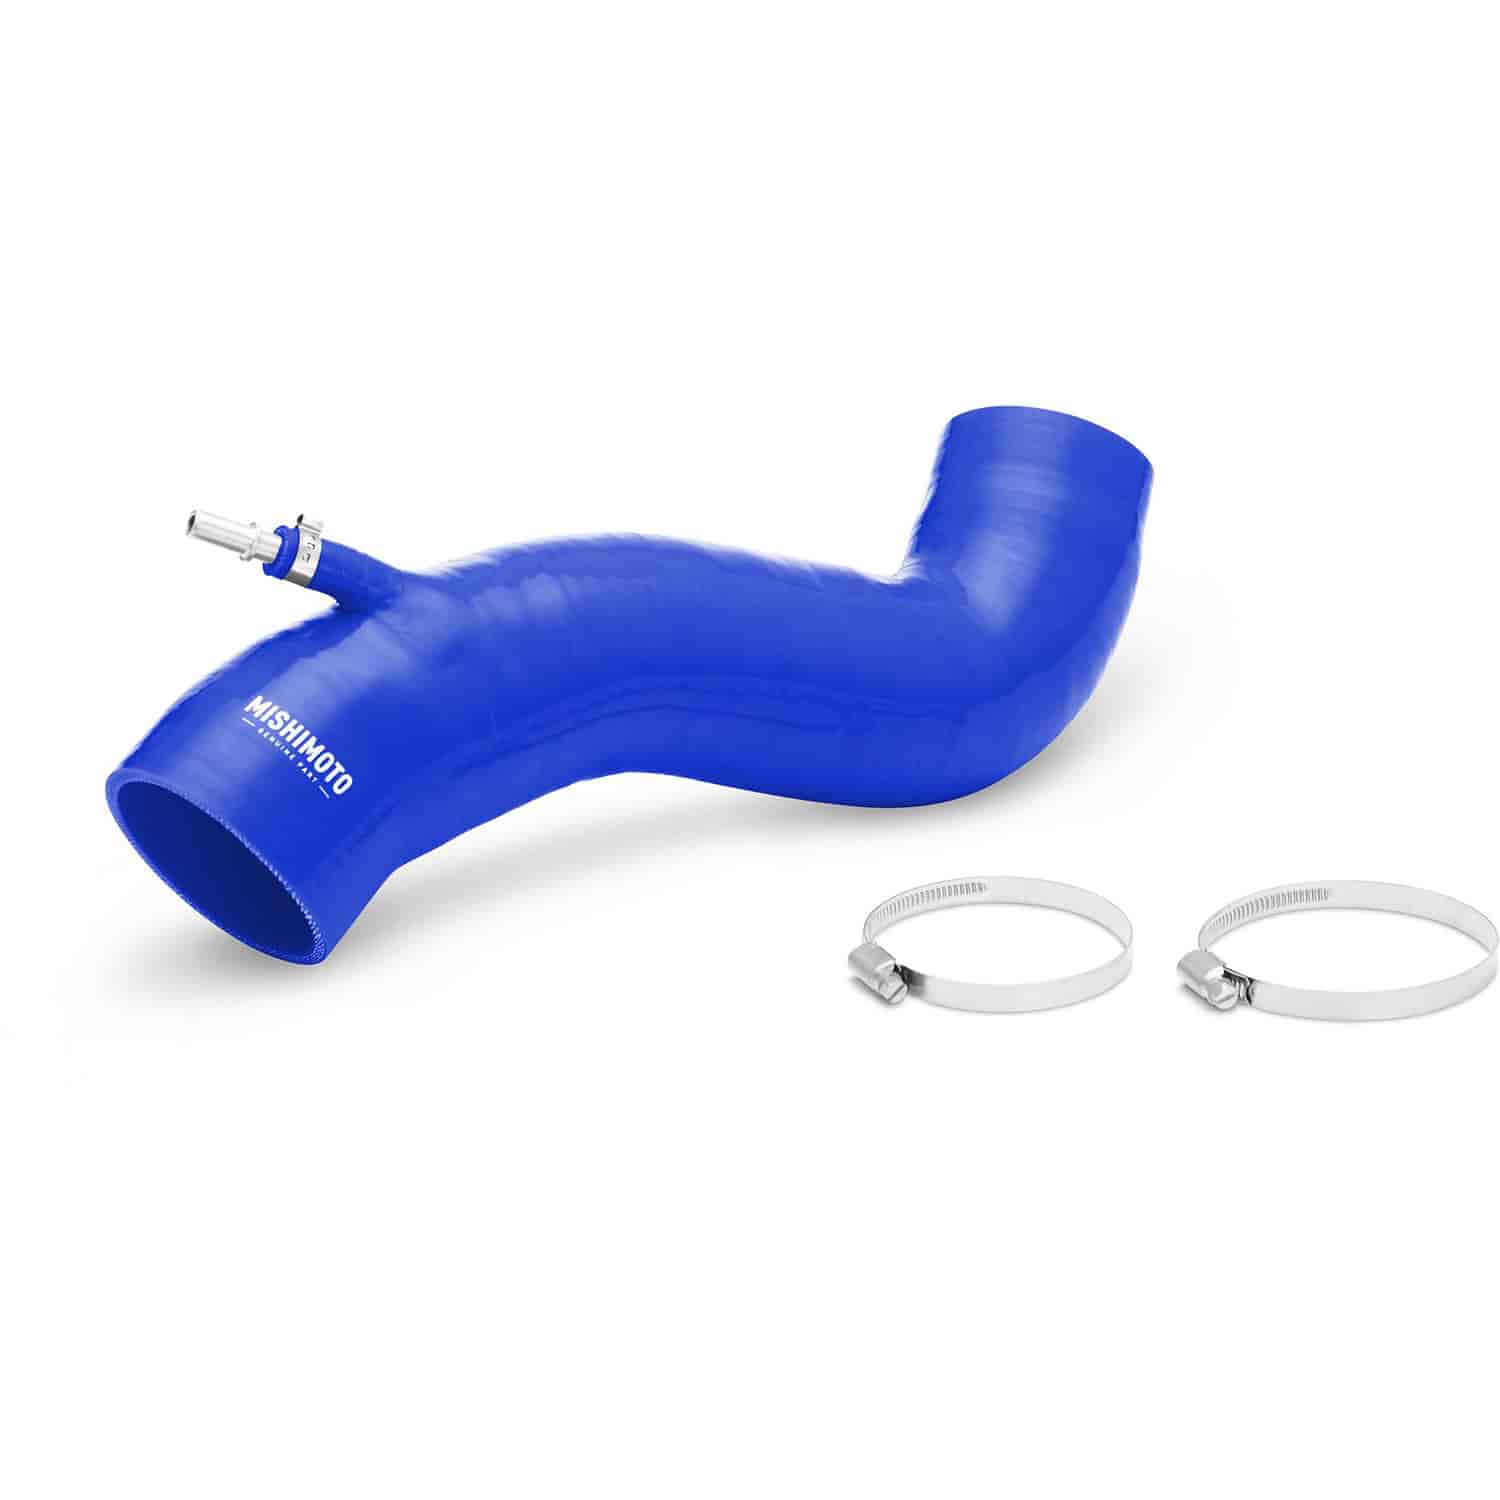 Ford Fiesta ST Silicone Induction Hose - MFG Part No. MMHOSE-FIST-14IHBL